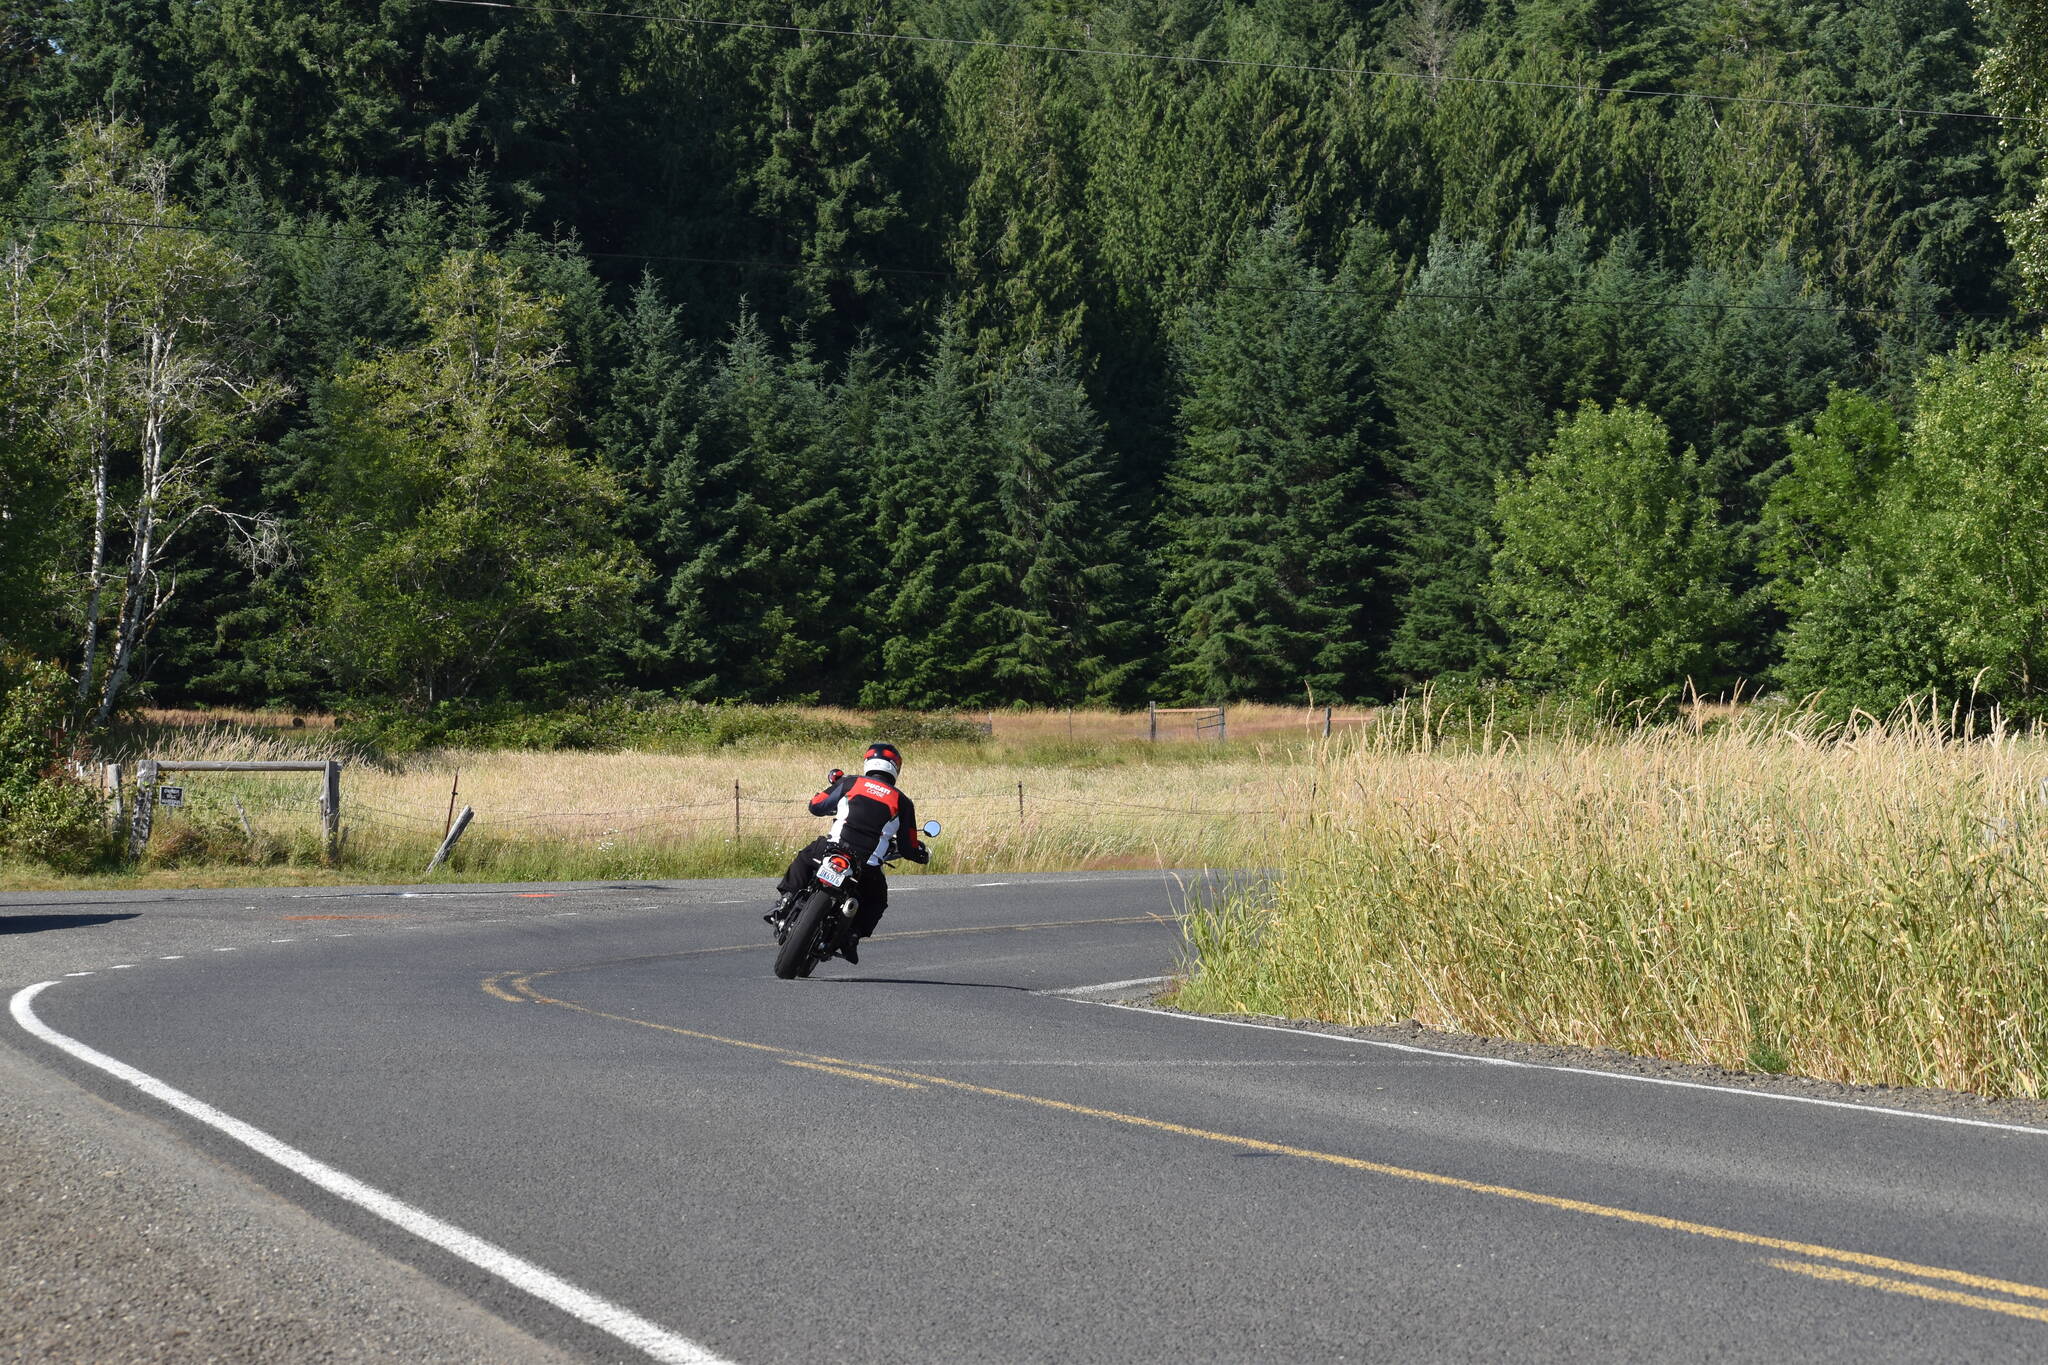 Clayton Franke / The Daily World
A motorcyclist makes a sharp right turn toward Oakville on Garrard Creek Road in southeast Grays Harbor County. Following construction, the road will continue straight, through the sheep pasture, before a more gradual hook to the right.